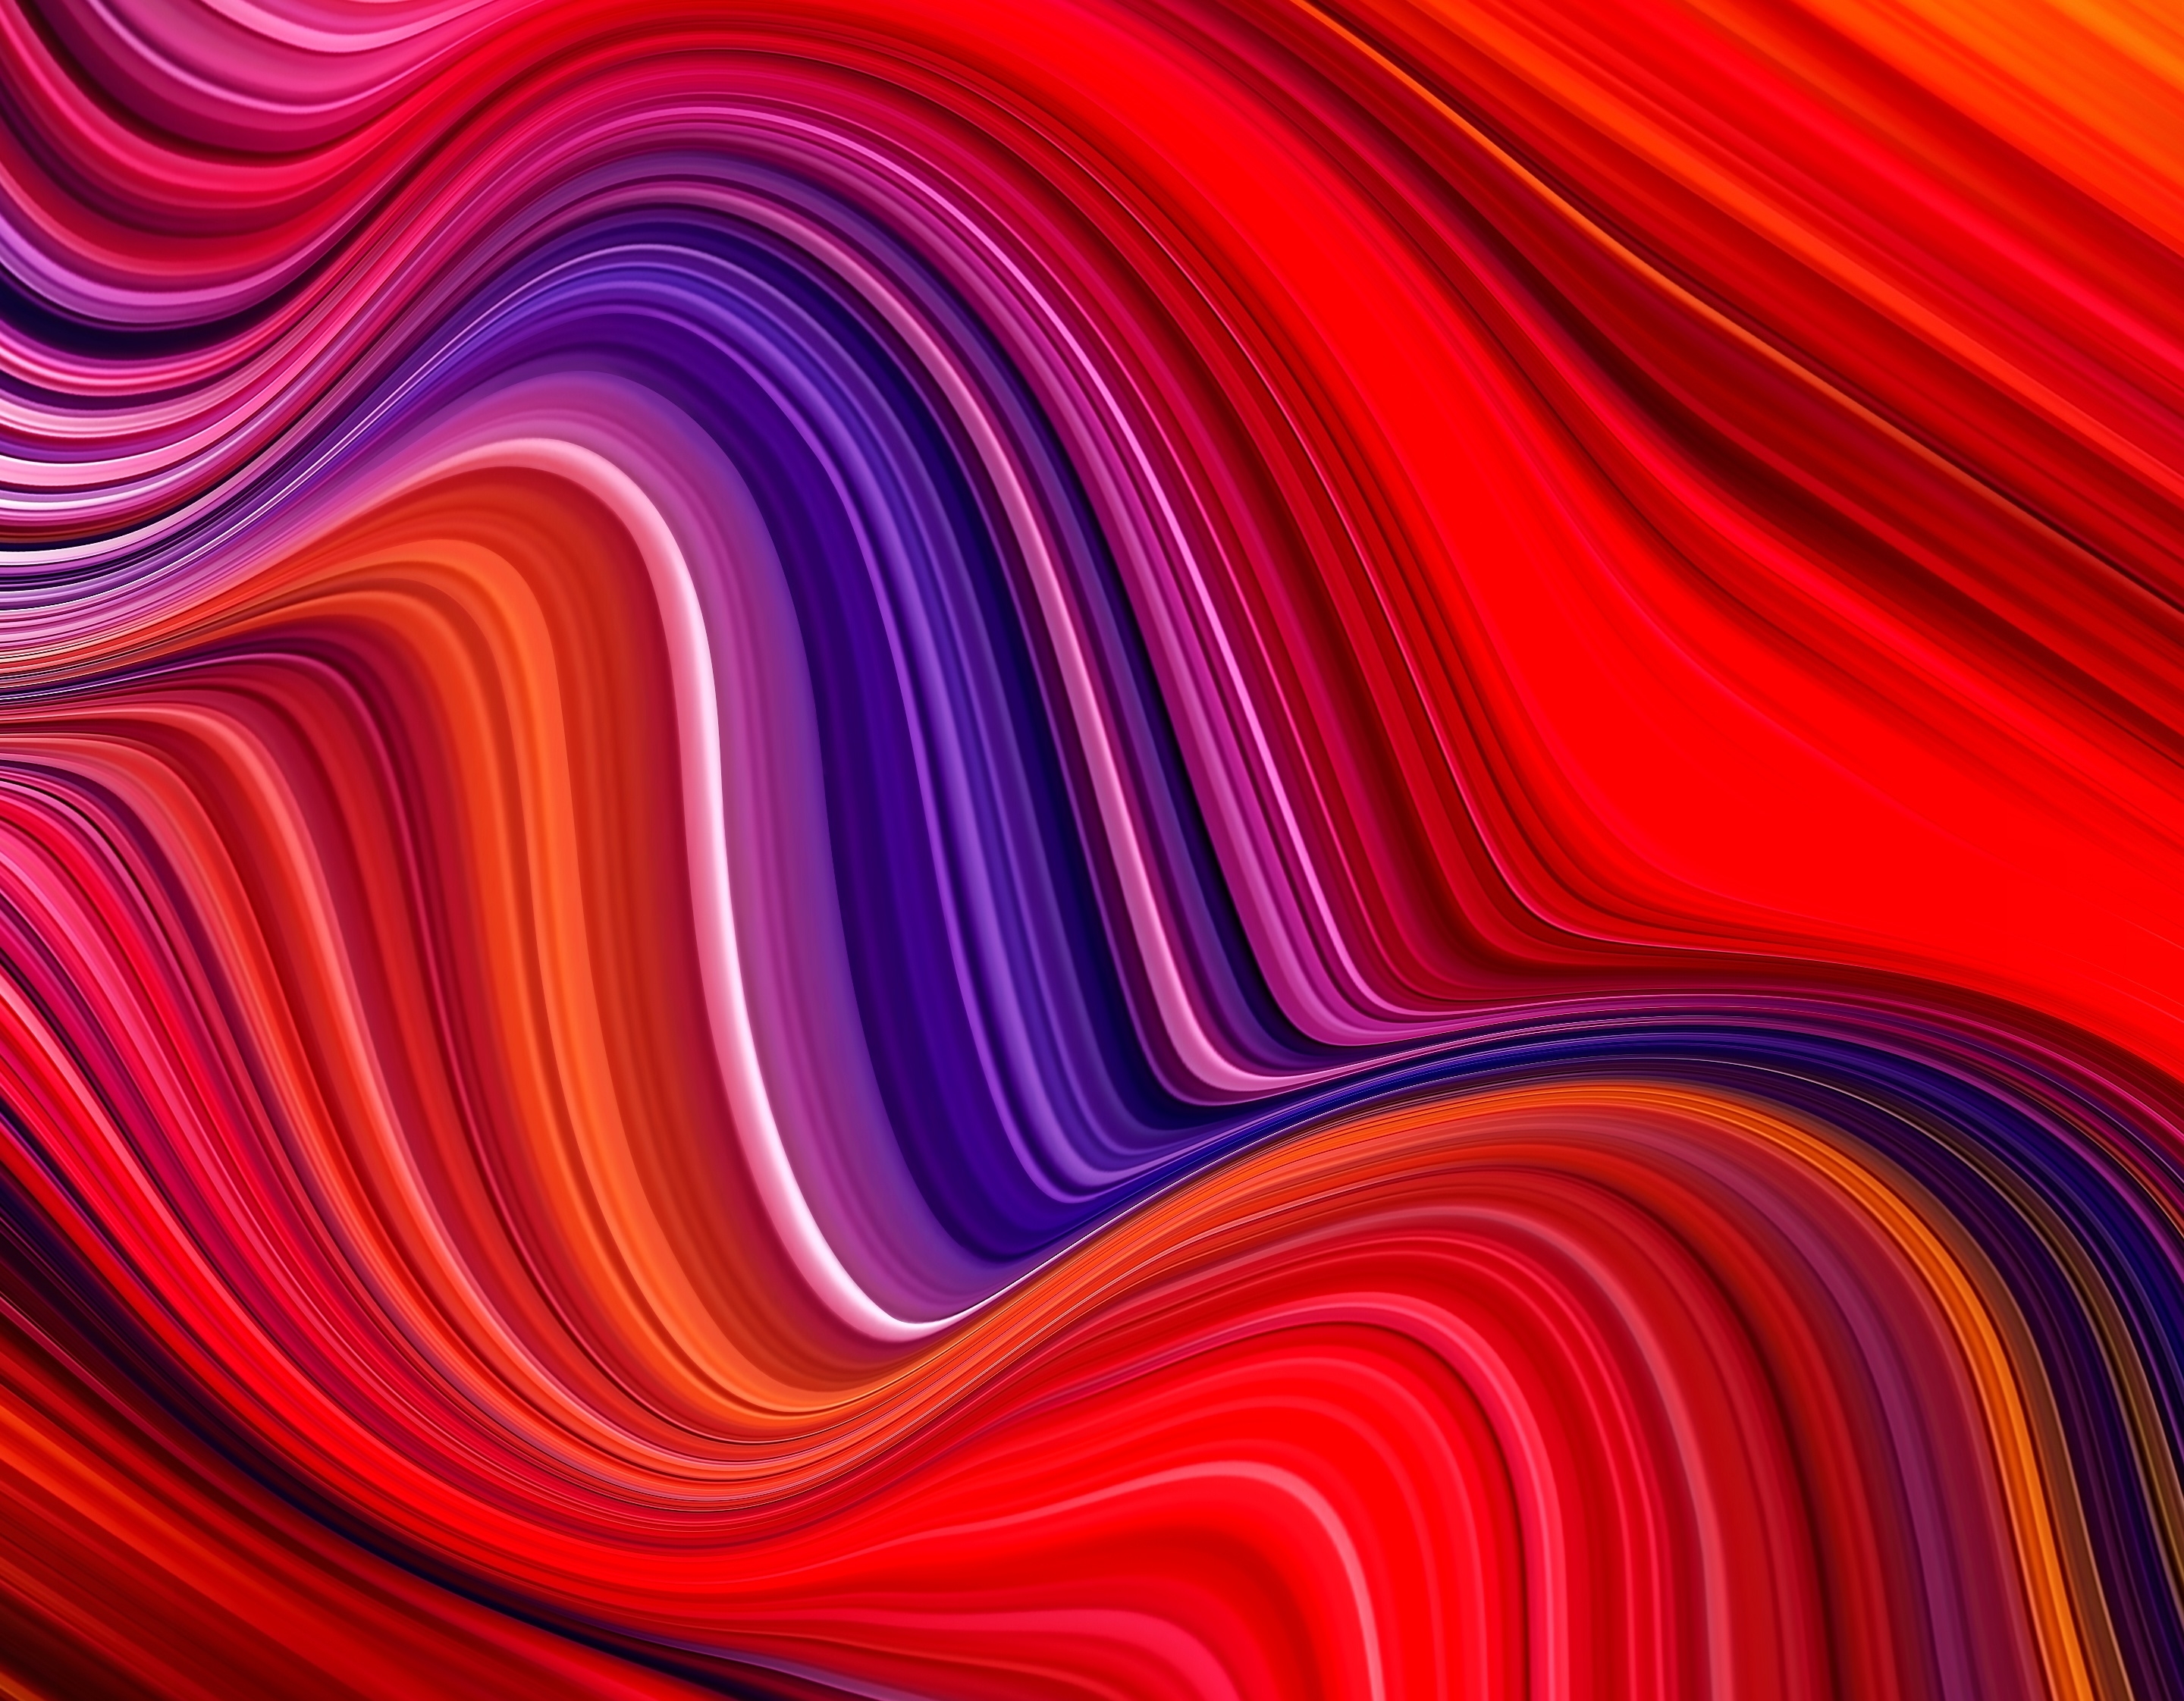 Curved Abstract Design Wallpaper Hd Abstract 4k Wallpapers Images